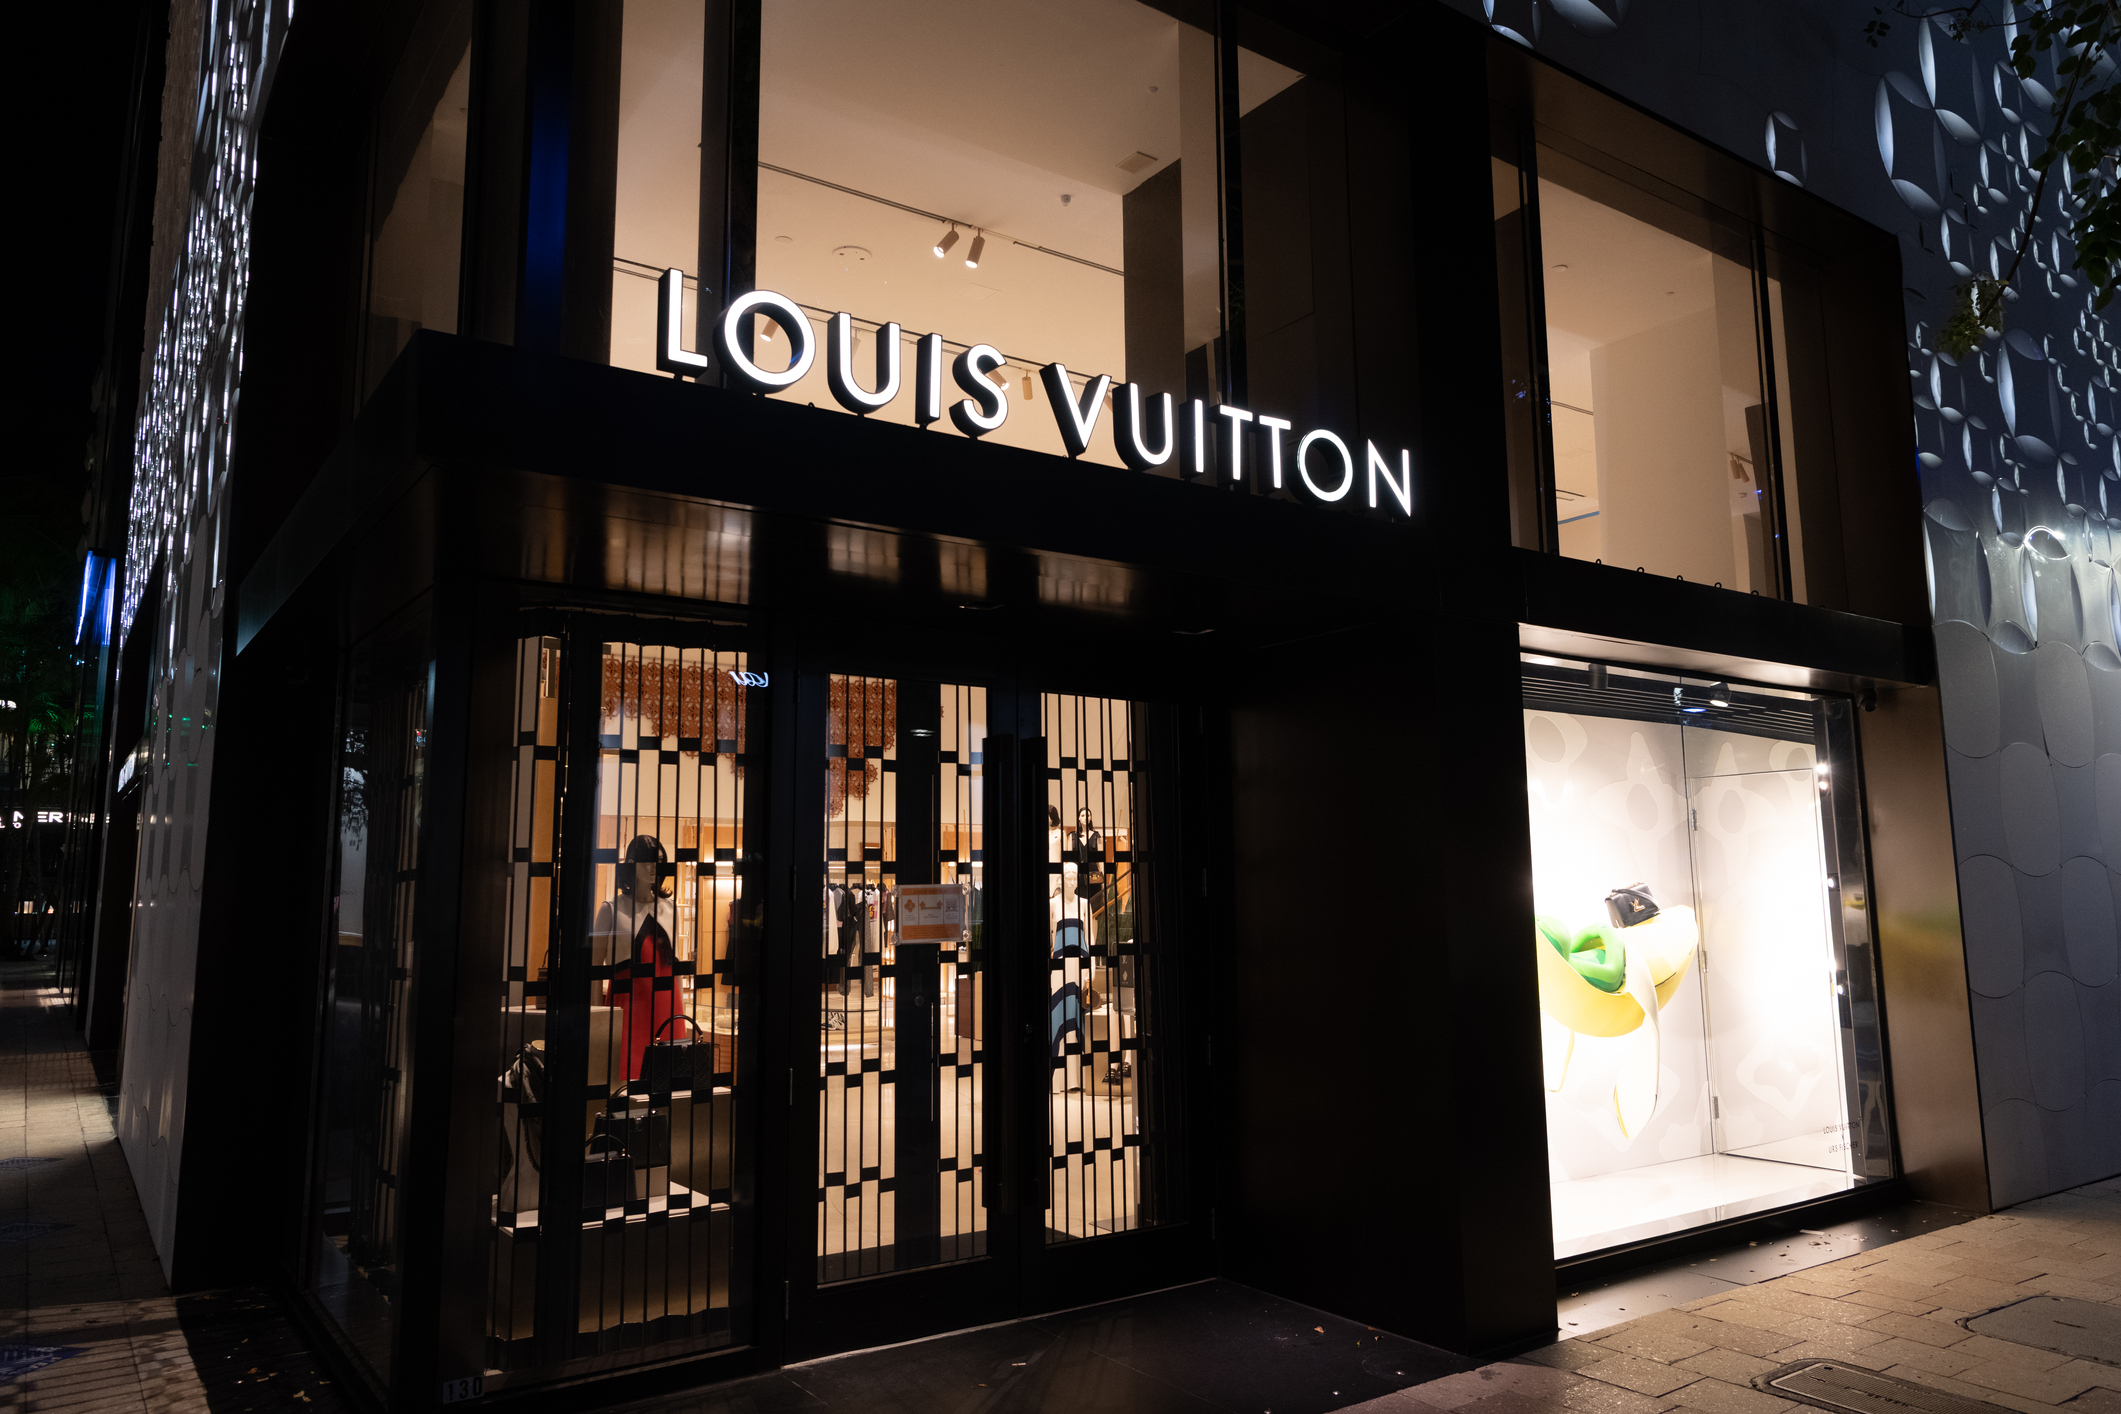 Louis Vuitton can now be delivered to your door in Singapore and Malaysia